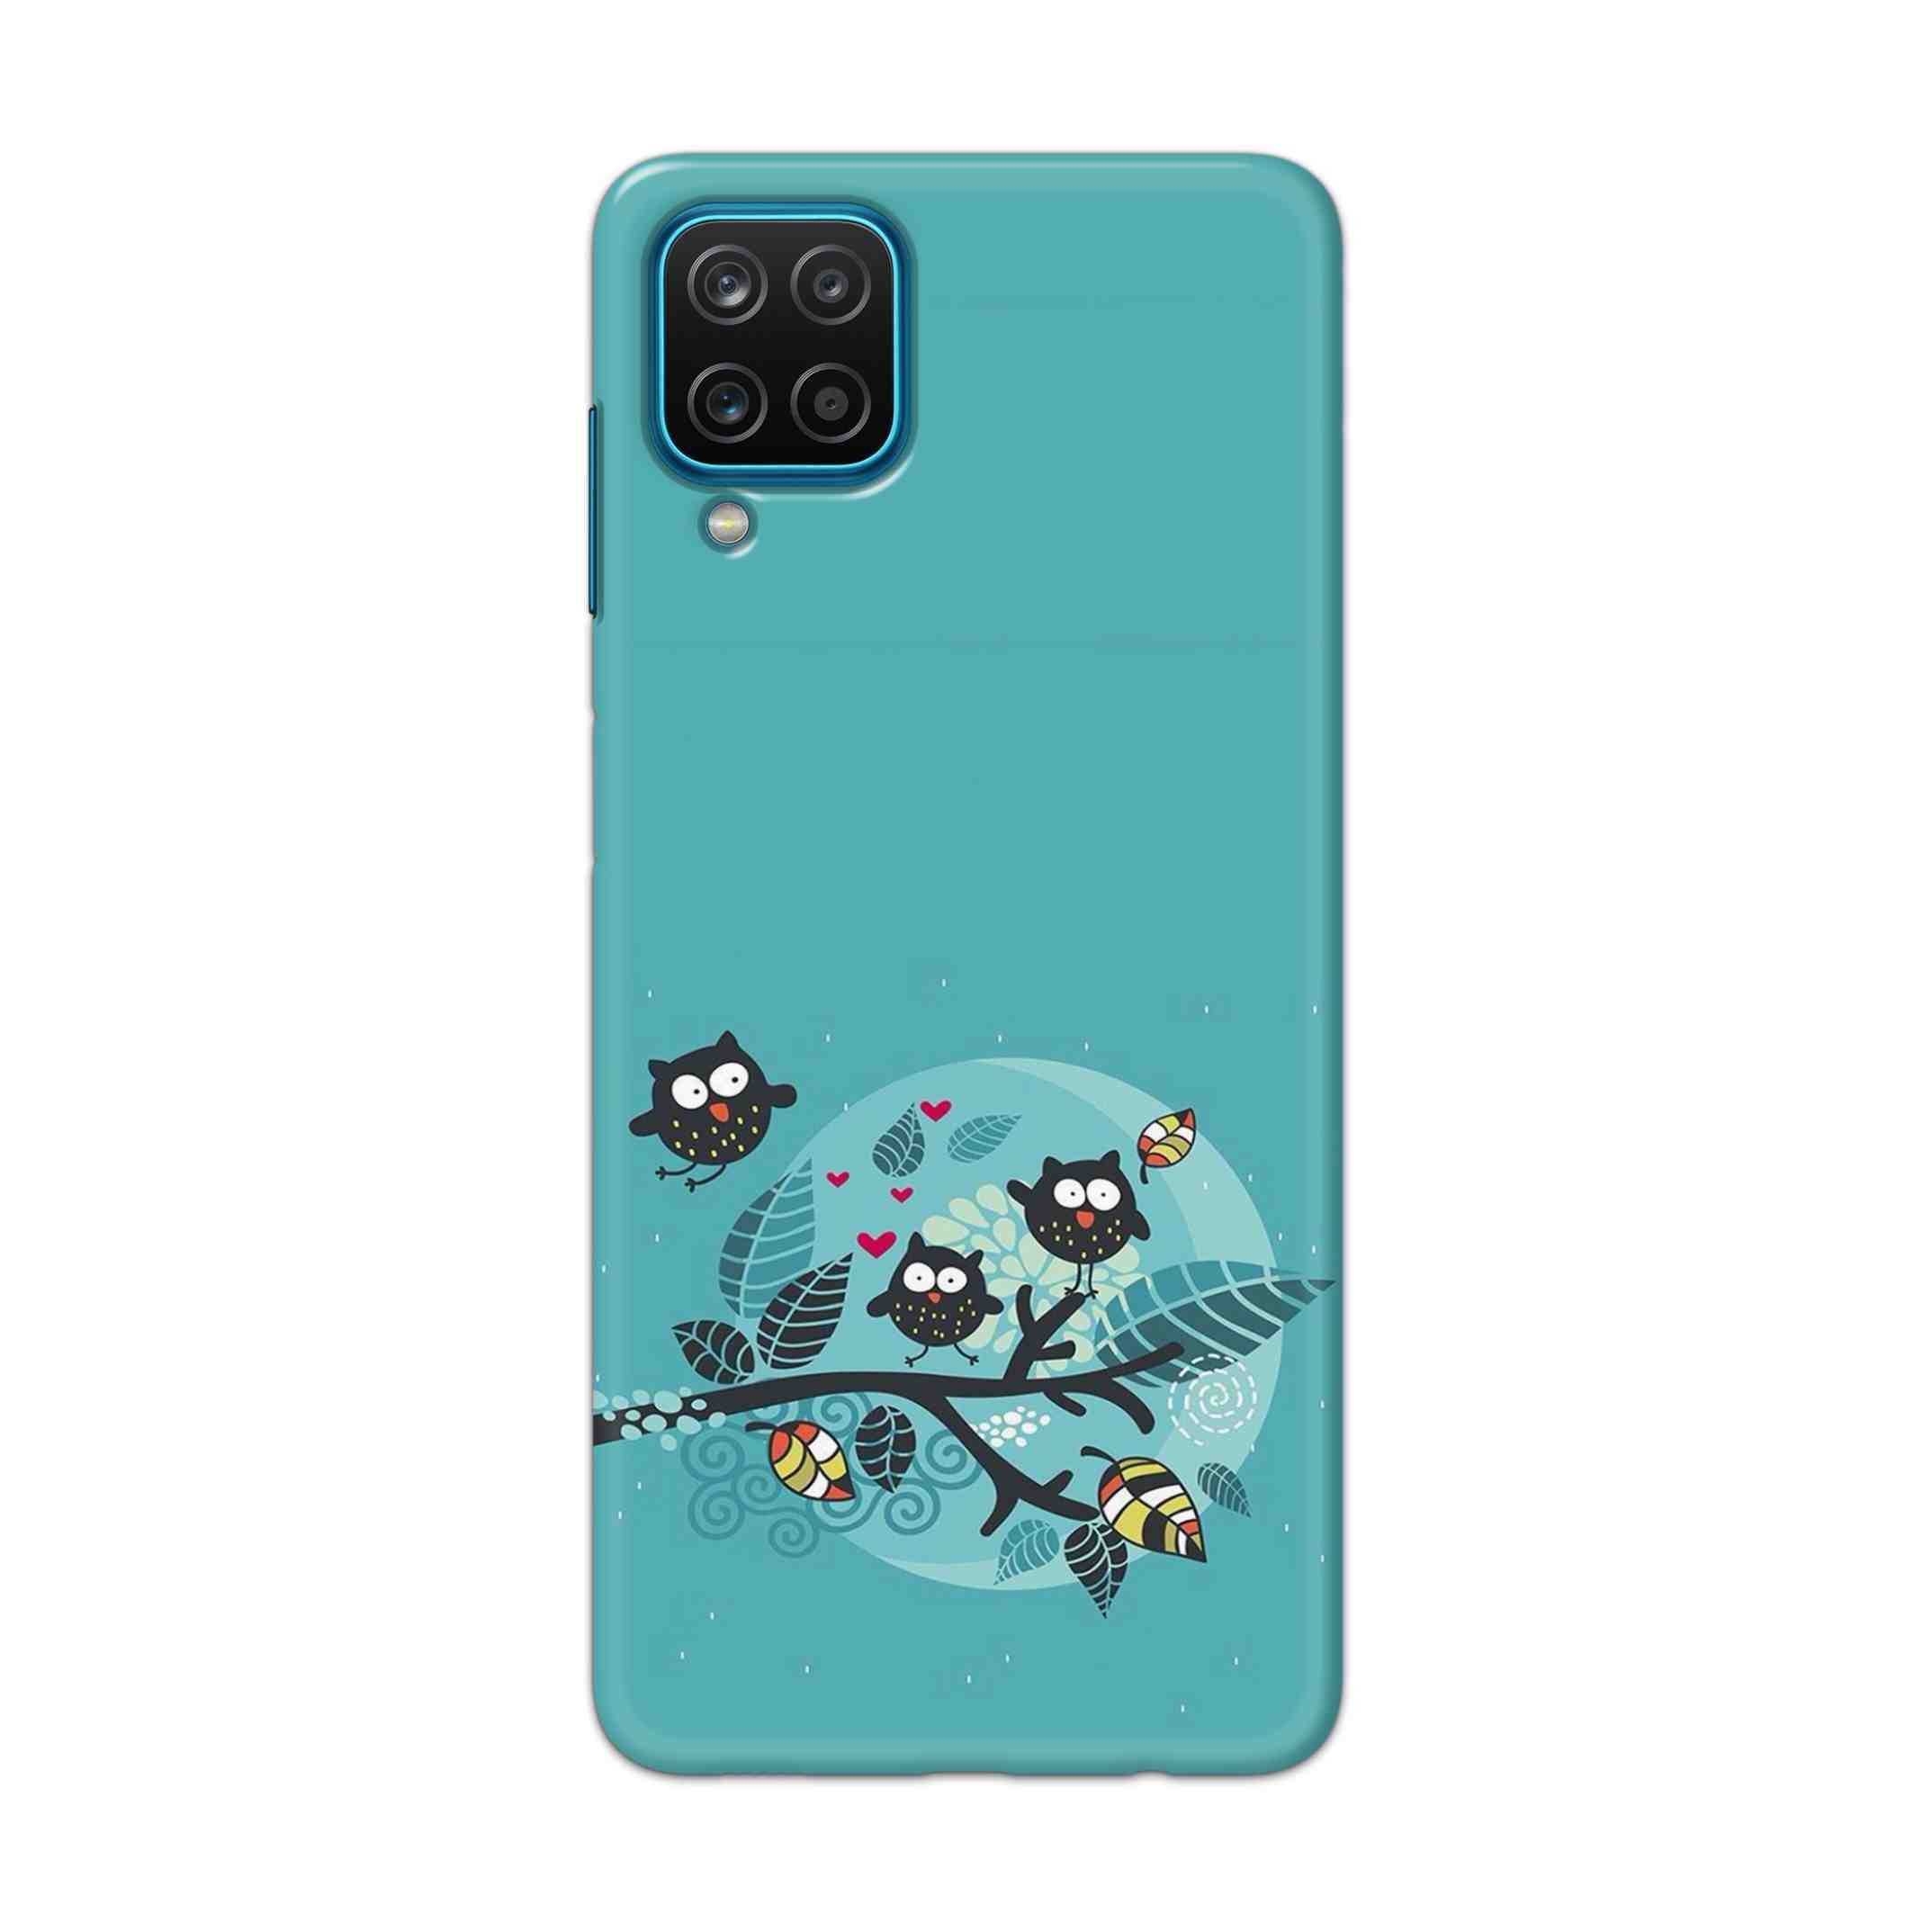 Buy Owl Hard Back Mobile Phone Case Cover For Samsung Galaxy A12 Online